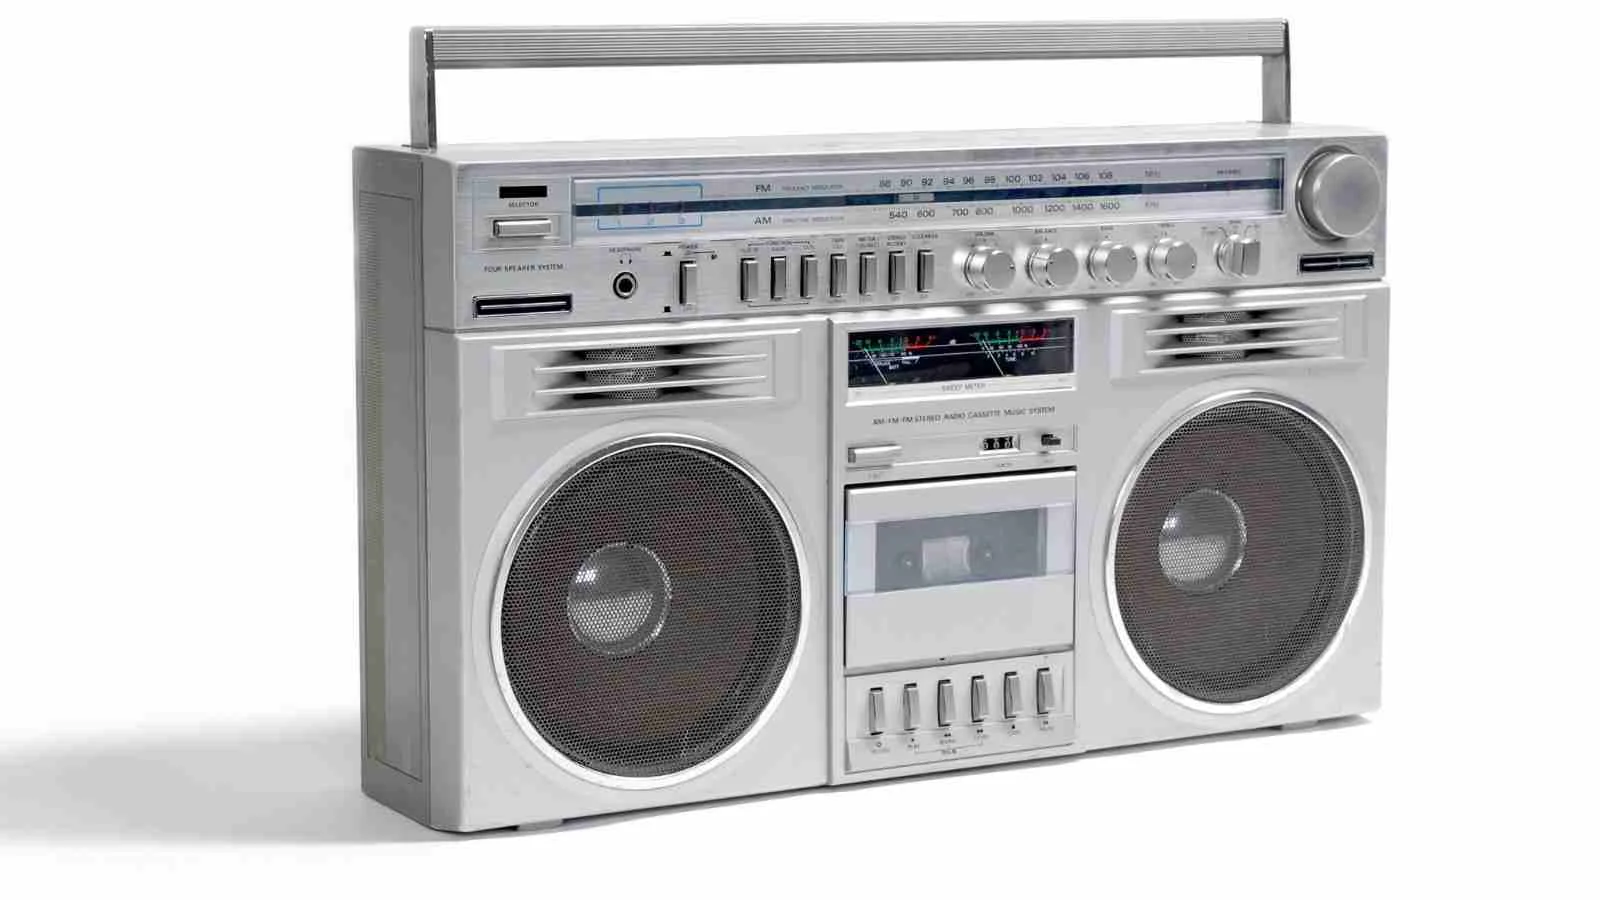 A large boombox from the 1980s